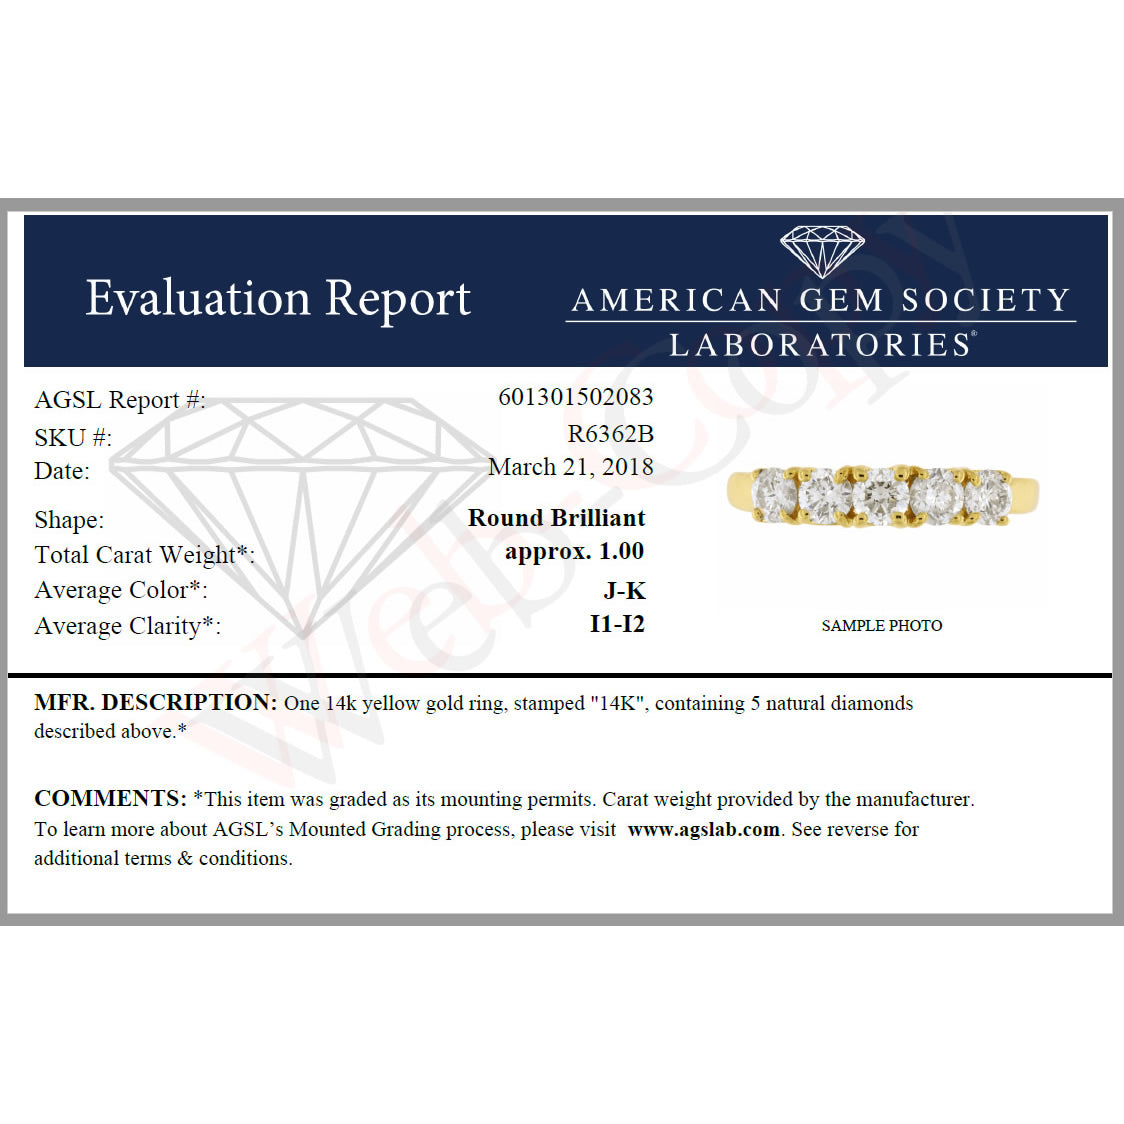 1 cttw Certified I1-I2 5-Stone Diamond Ring 14K Yellow Gold Engagement